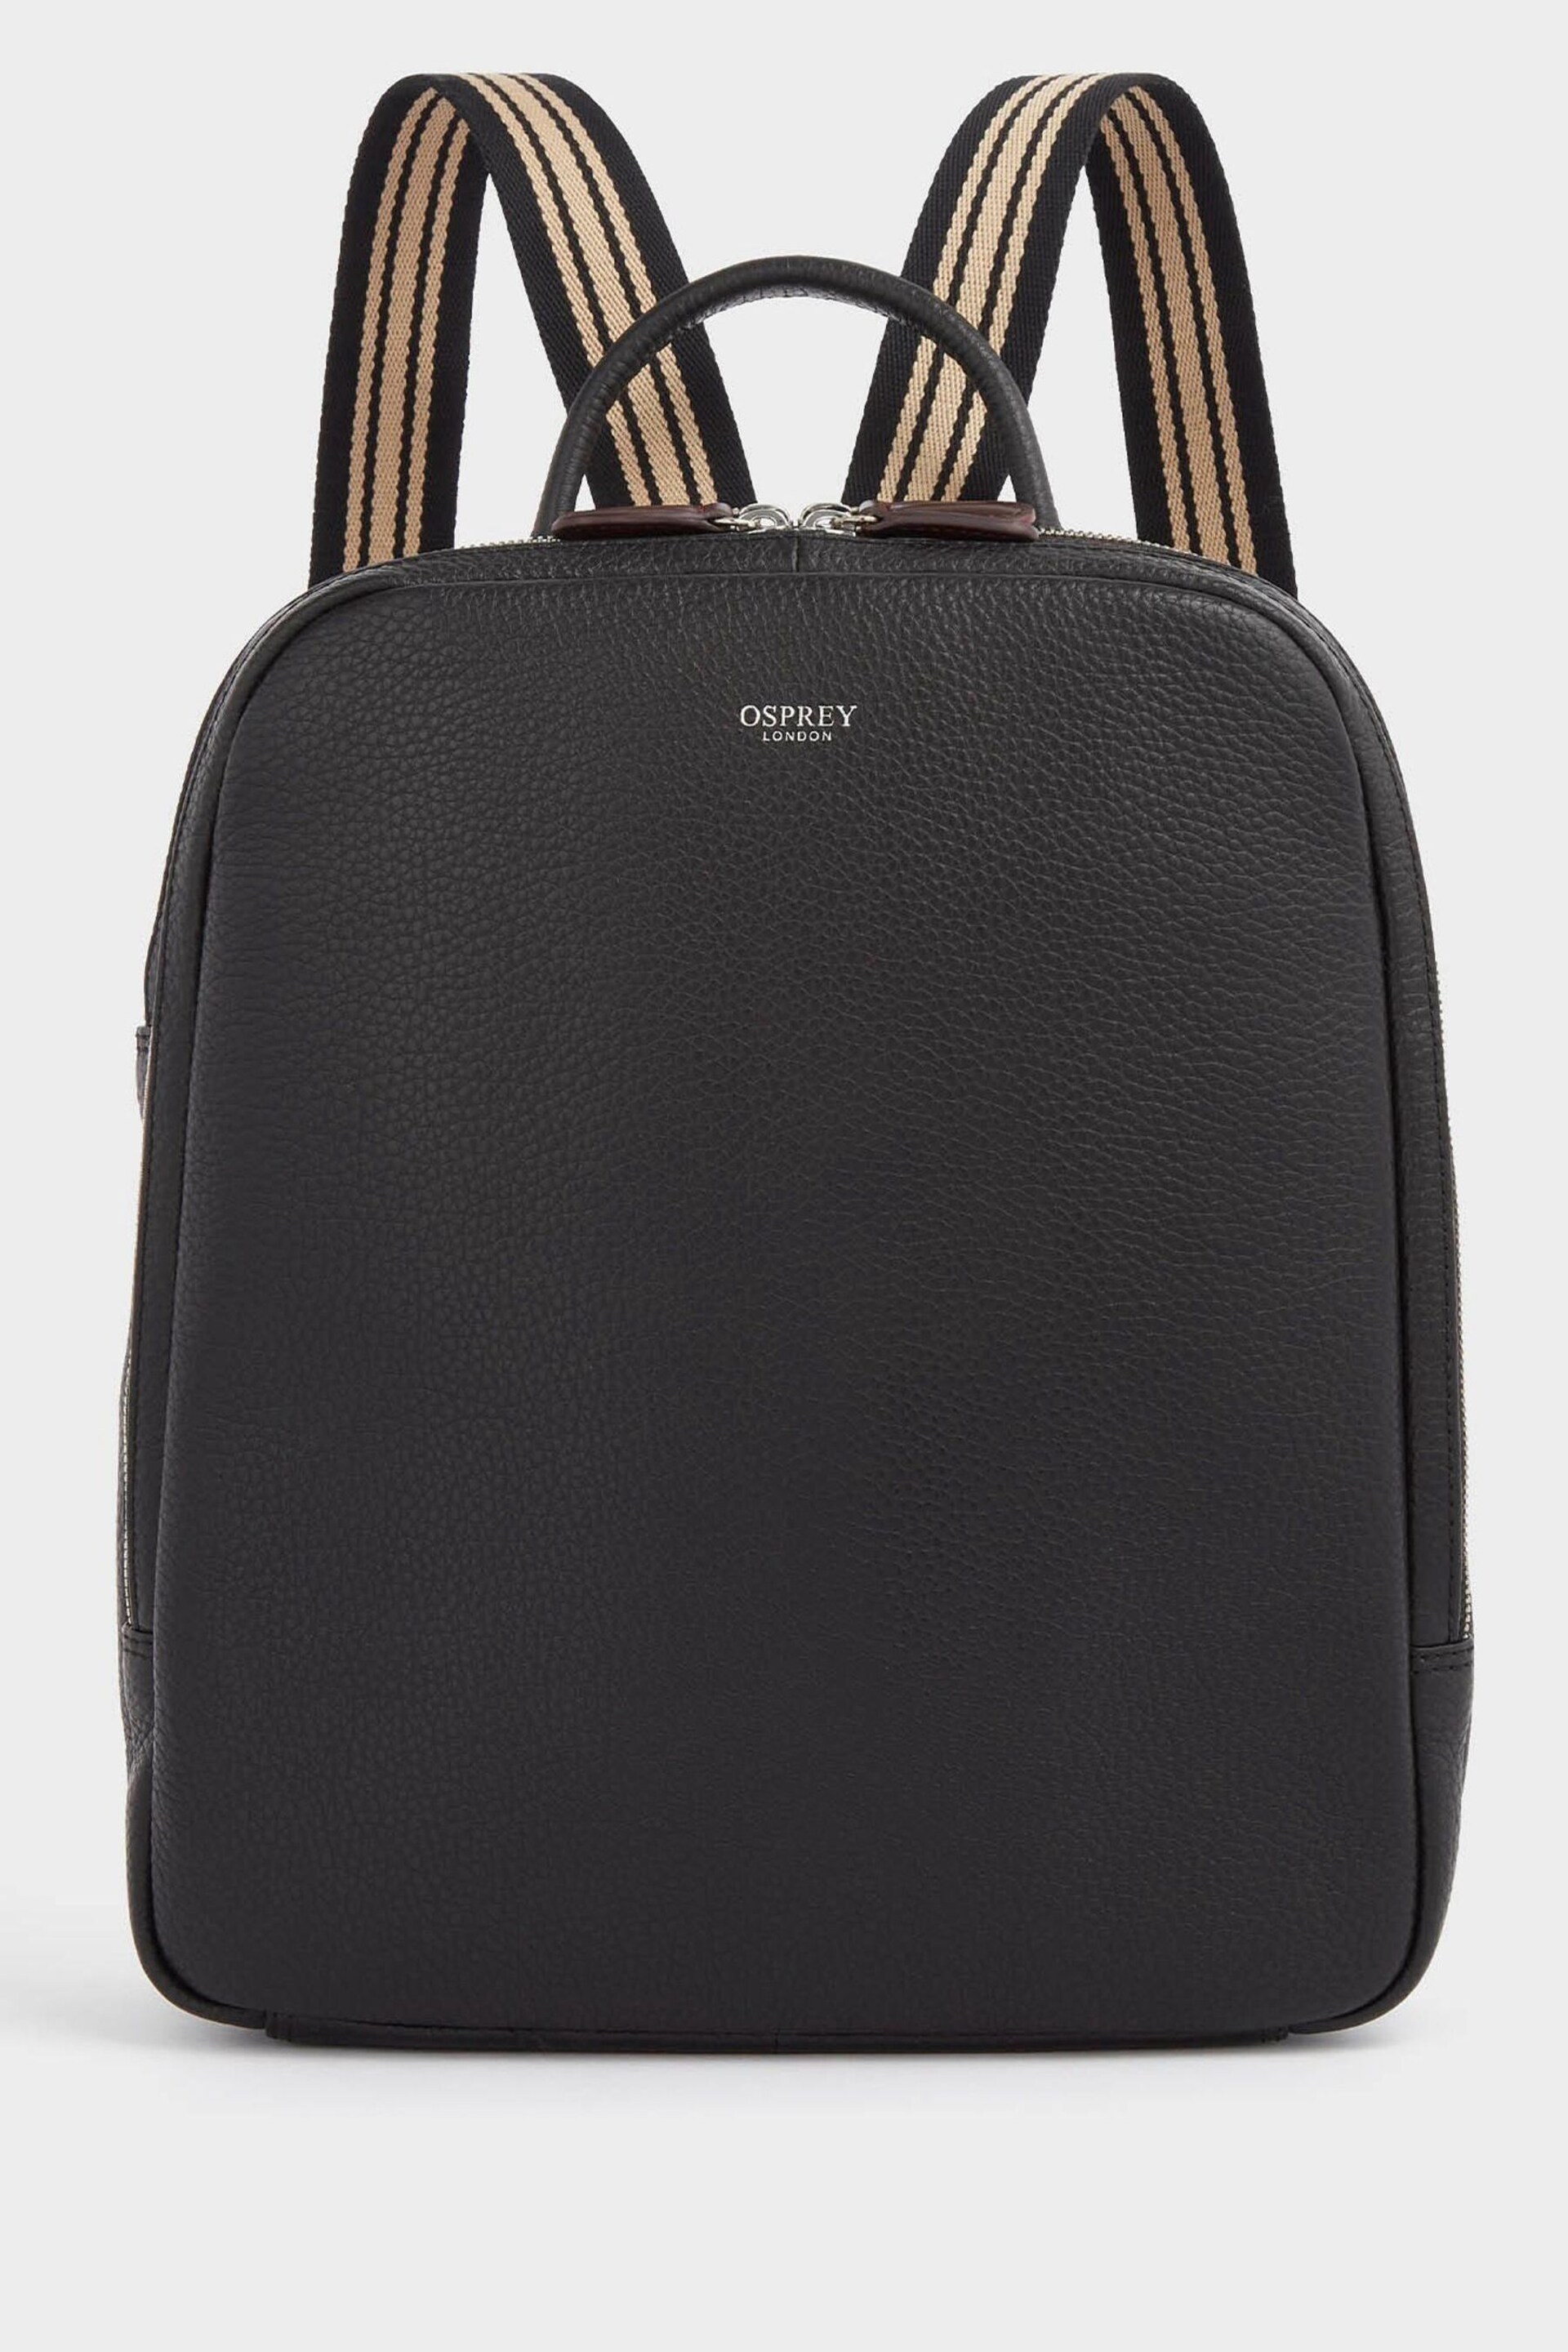 Osprey London The Chiswick Leather Backpack - Image 2 of 11